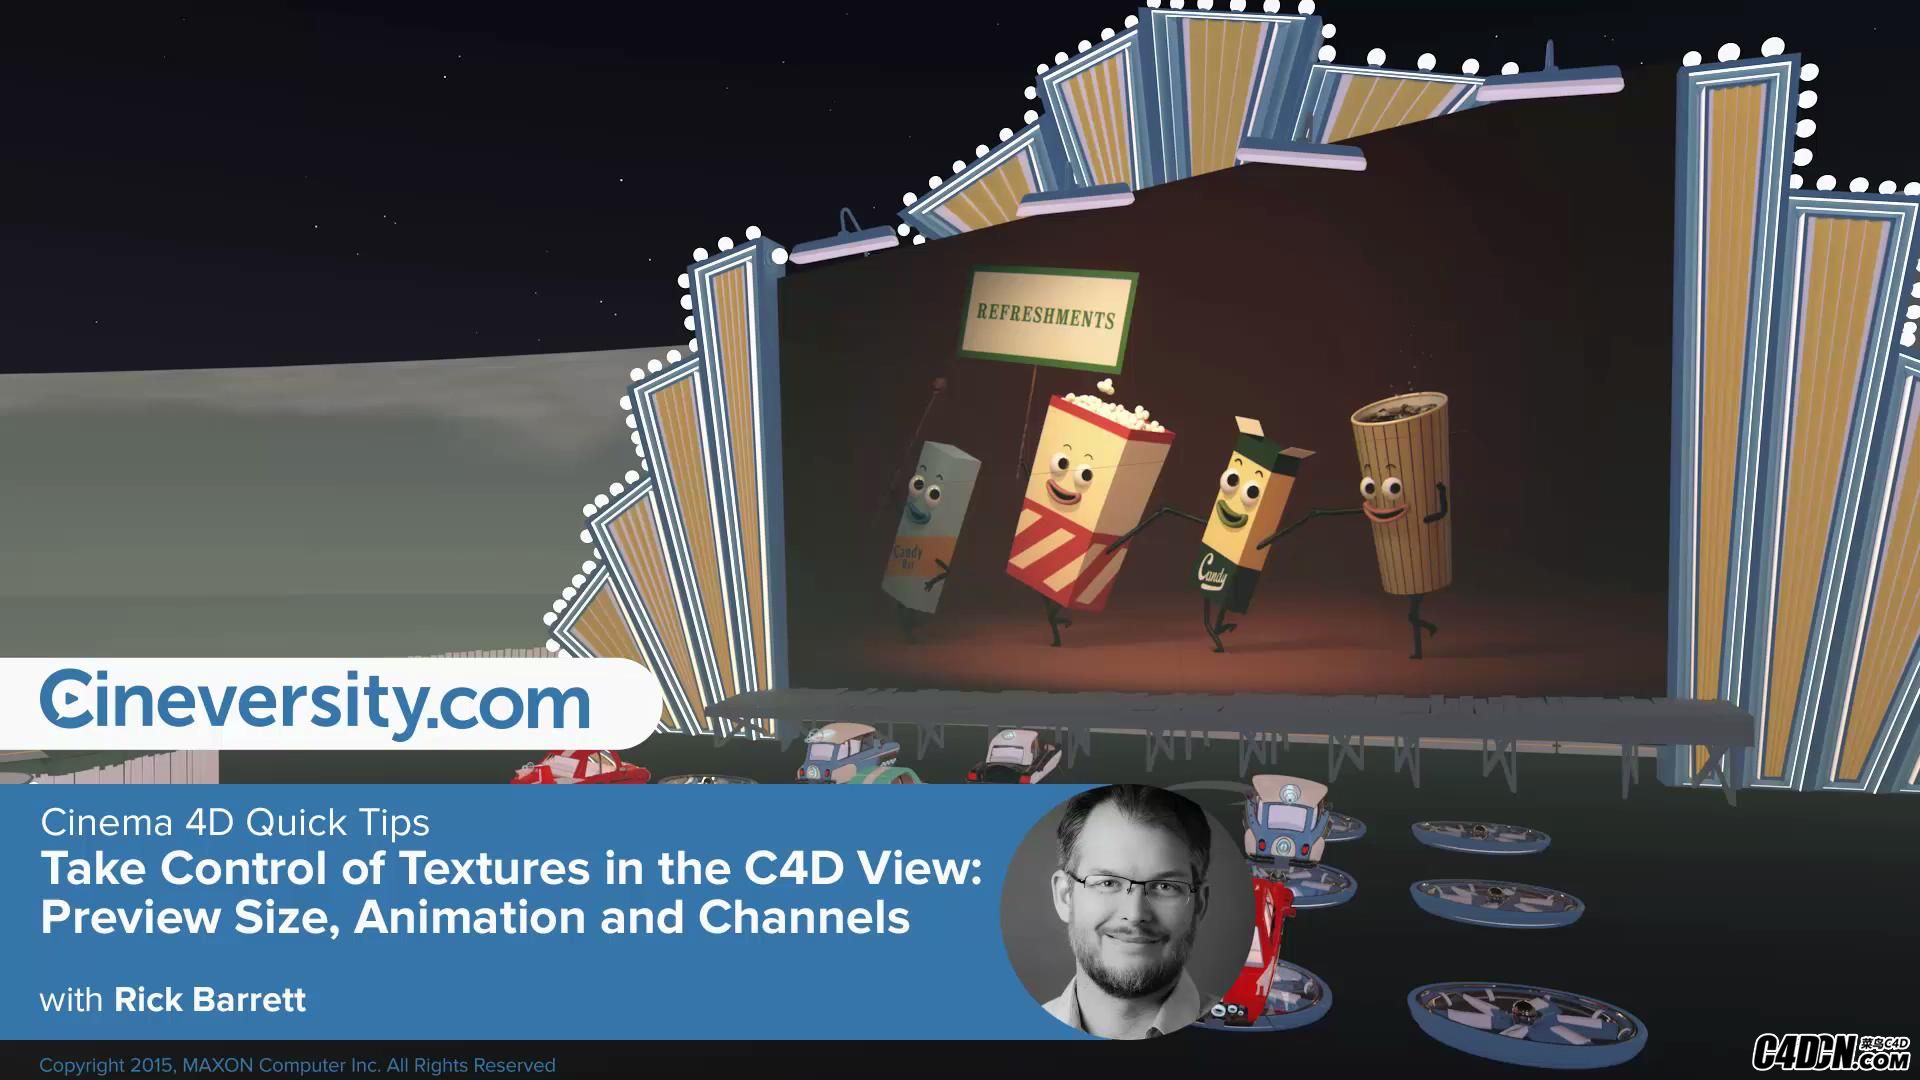 10 Take Control of Textures in the C4D View Preview Size, Animation and Channels.jpg